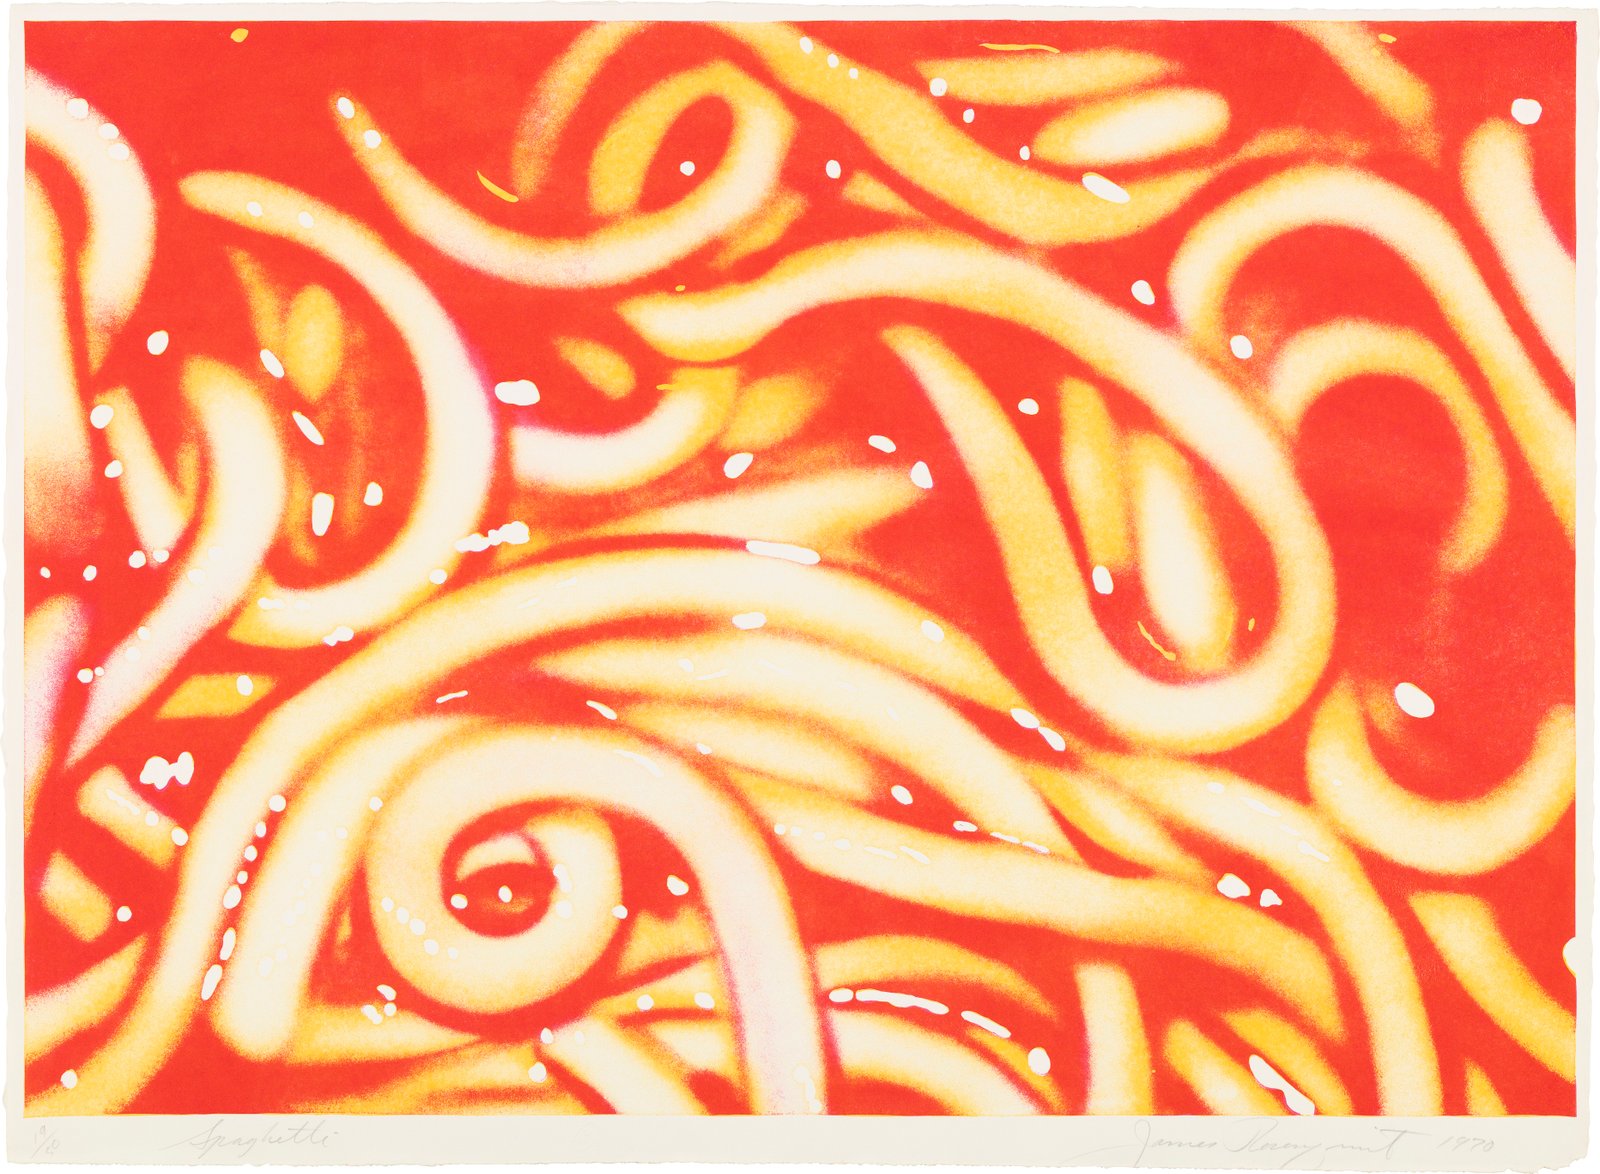 Print showing spaghetti in red sauce